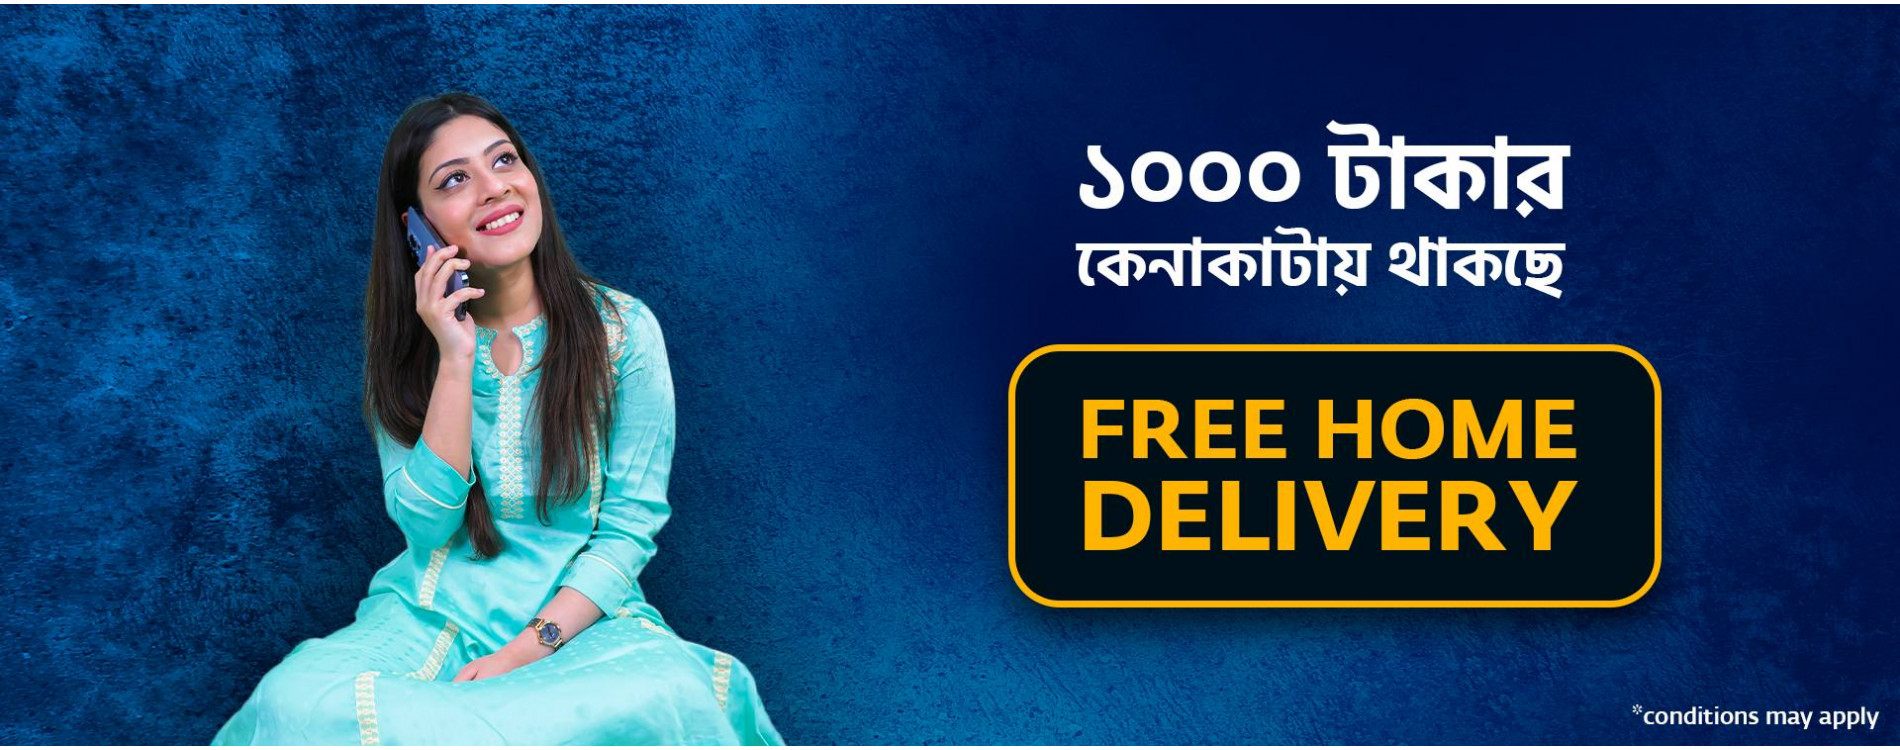 Ribana June free delivery web banner_